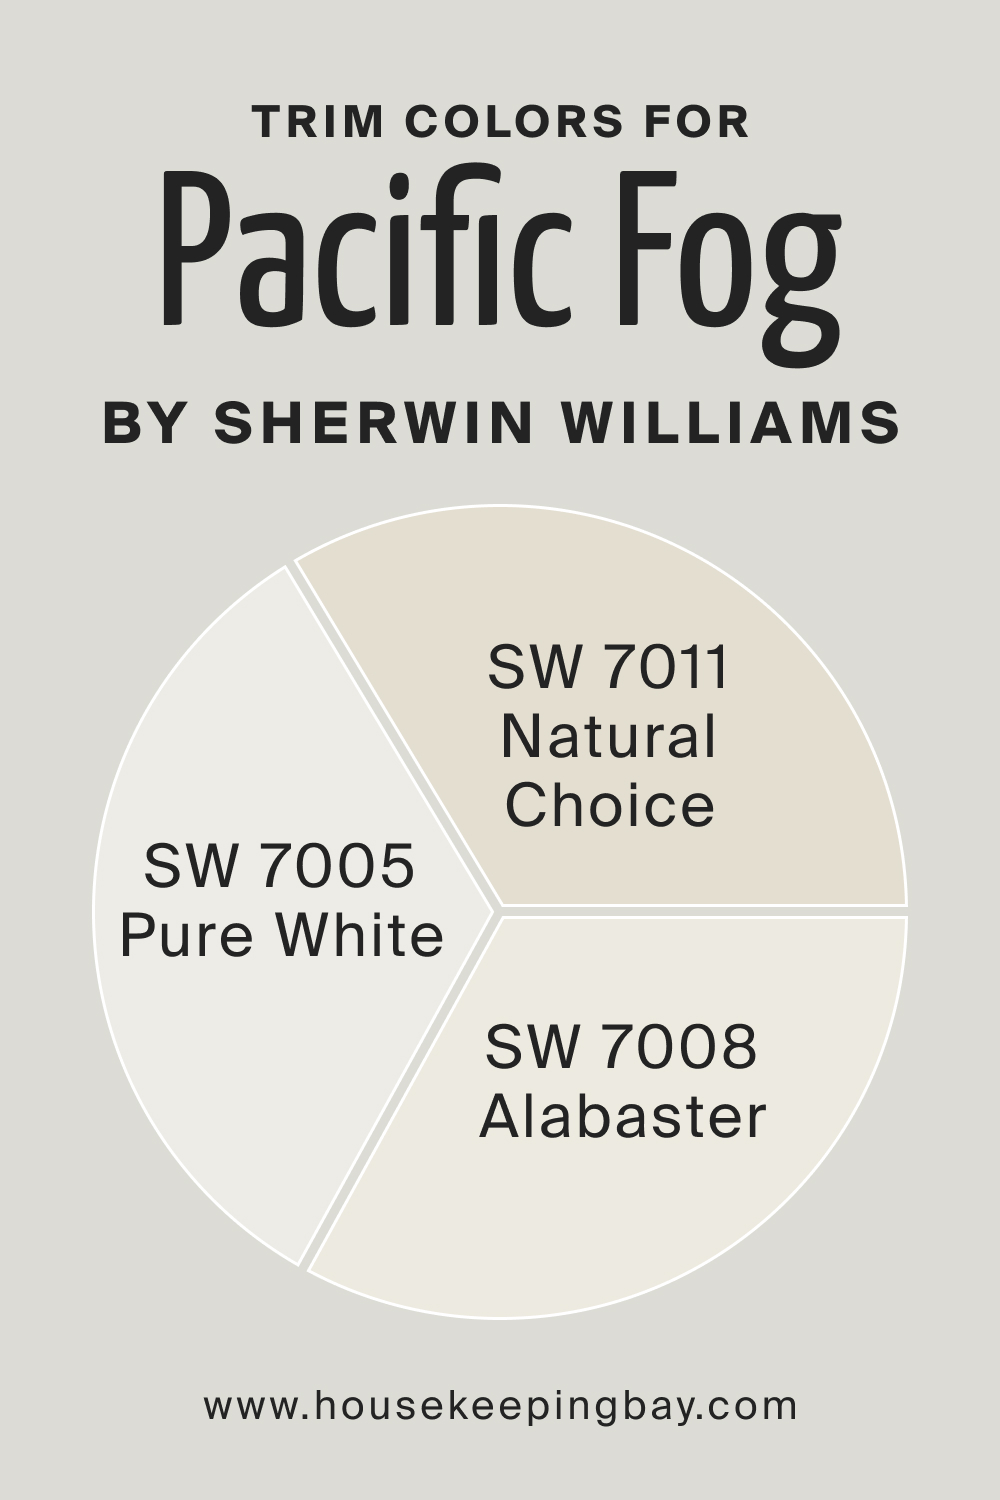 Trim Colors of SW 9627 Pacific Fog by Sherwin Williams